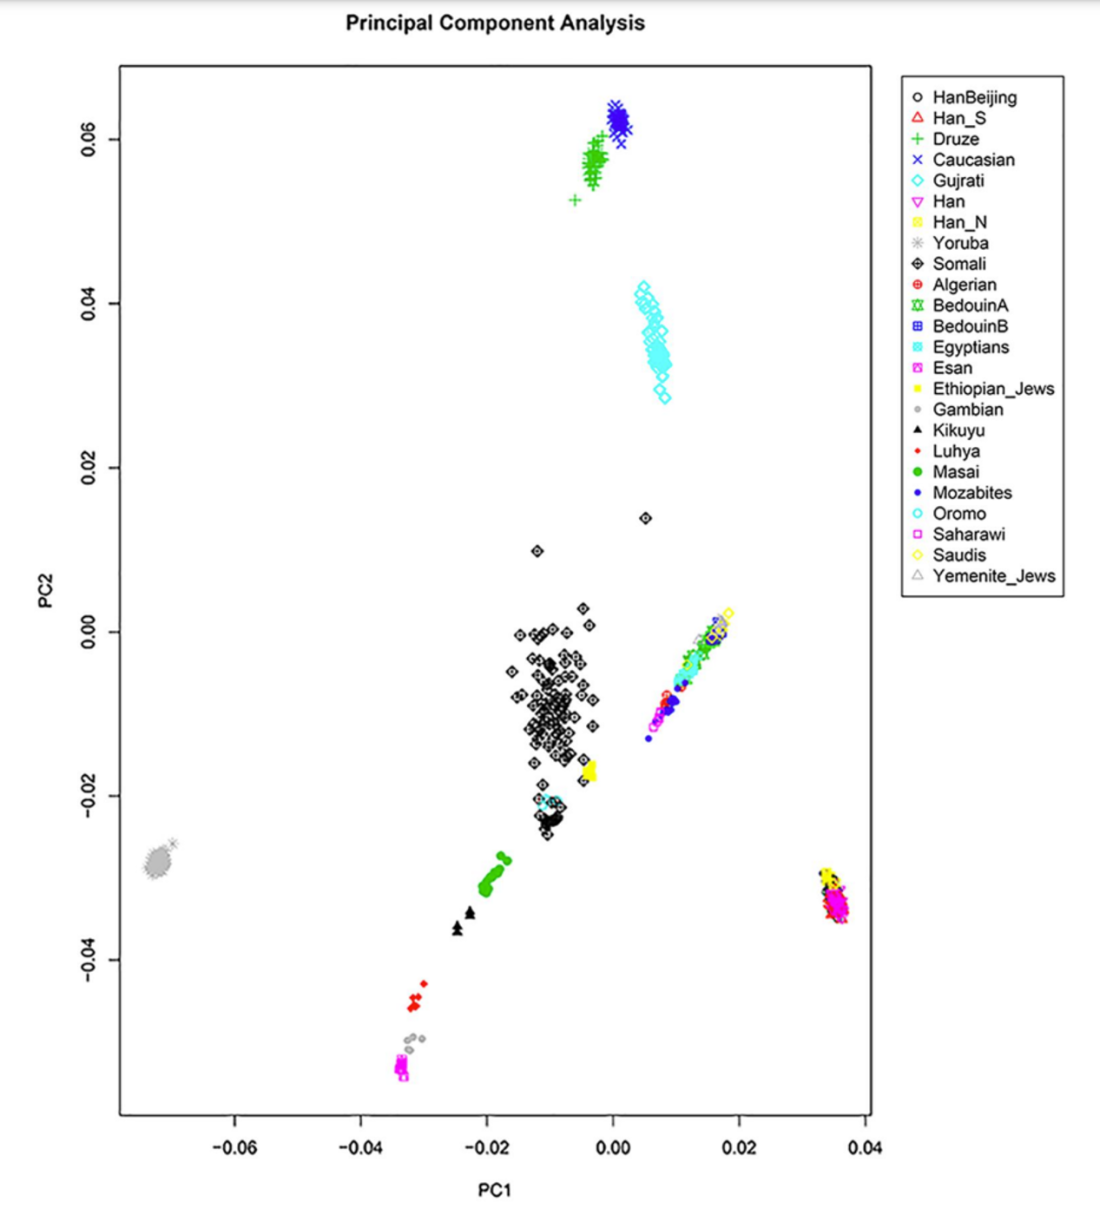 Principal Component Analysis of modern Northern Somali, Oromo, Ethiopian Jew and other global individuals. The Northern Somalis, who were born in the northeastern Puntland region of Somalia (most hailing from the Majerteen Darod clan), primarily cluster in a position parallel to but separate from the North African/Arabian cluster. This suggests that, on average, these Northern Somali individuals bear a comparable level of non-African ancestry as do North African individuals, though their constitutive non-African genome components appear to differ somewhat (Fig. S1 in Osman and Jonasson (2022)).